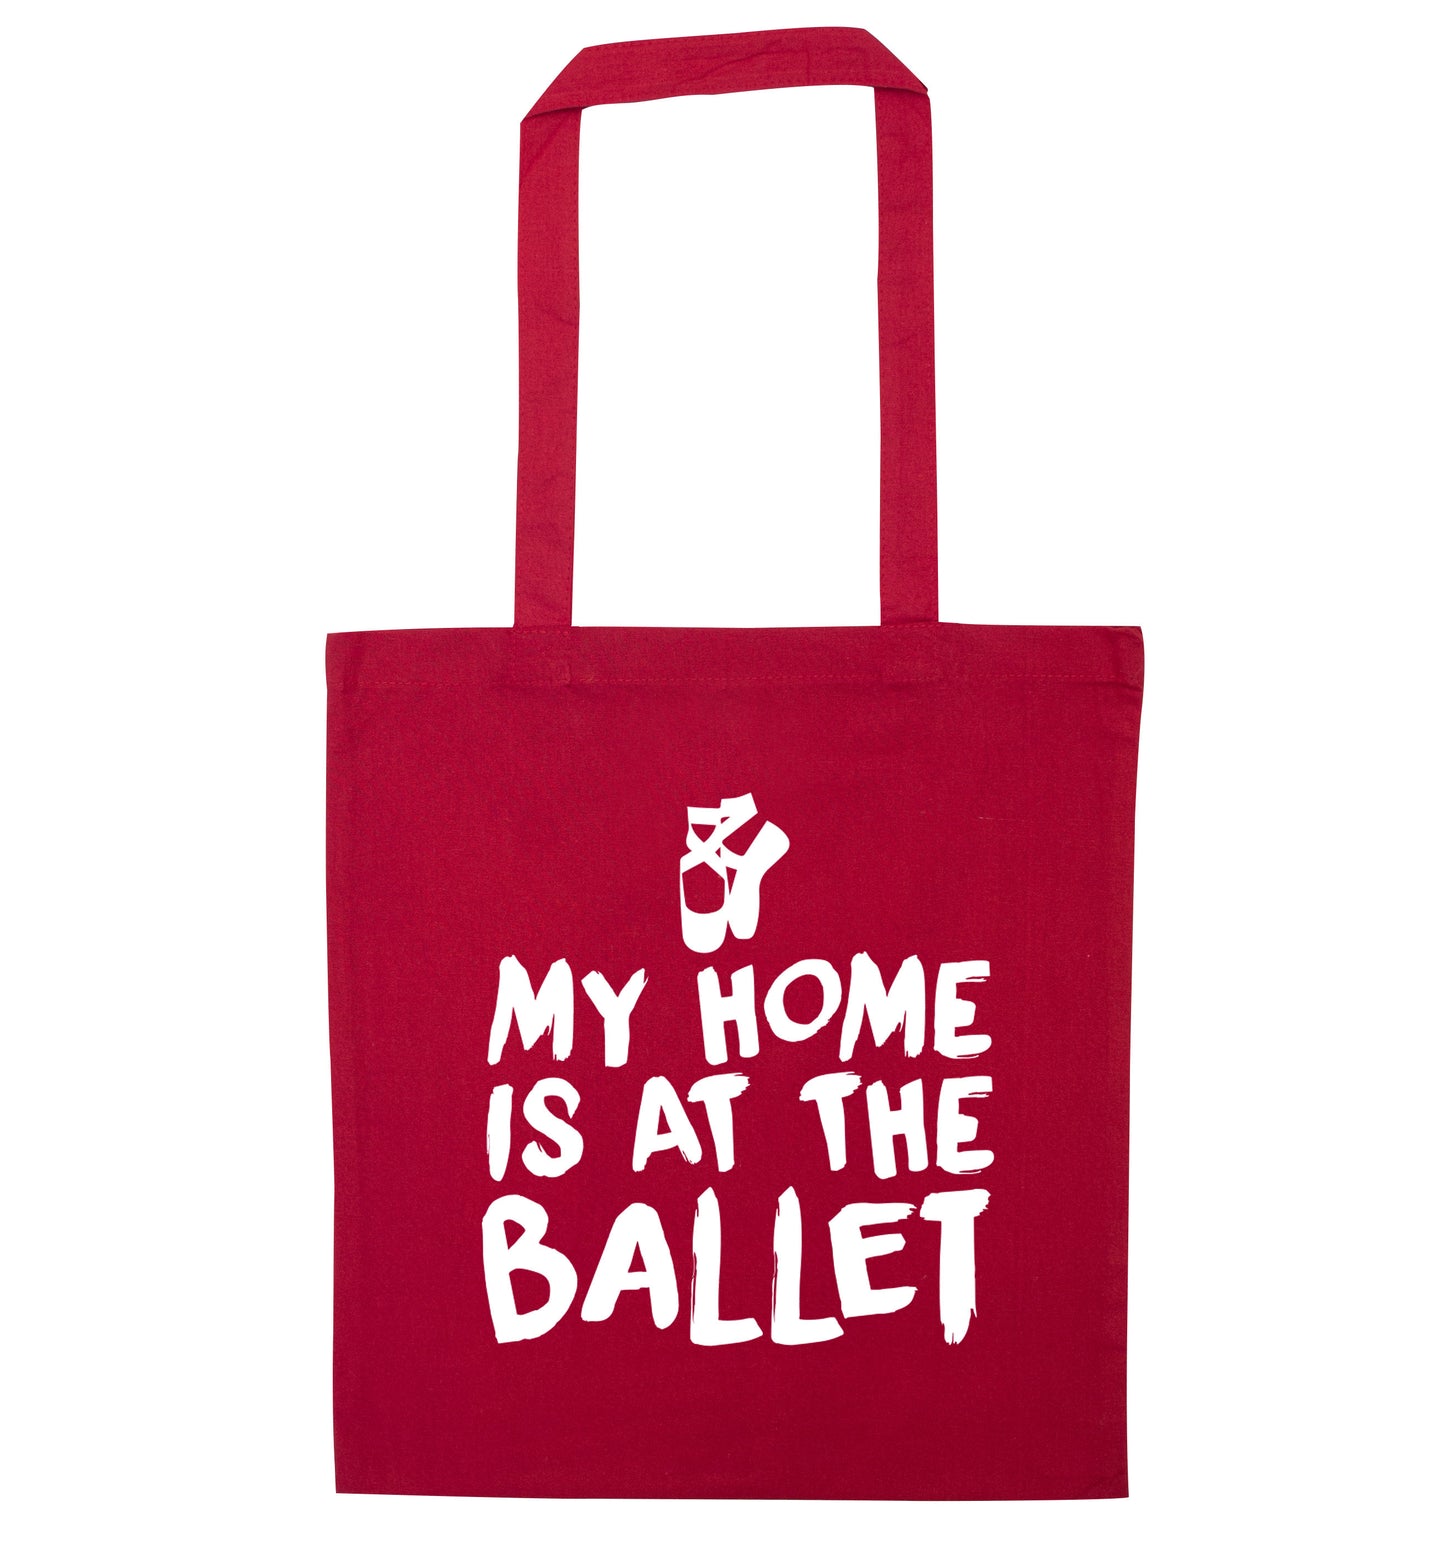 My home is at the ballet red tote bag